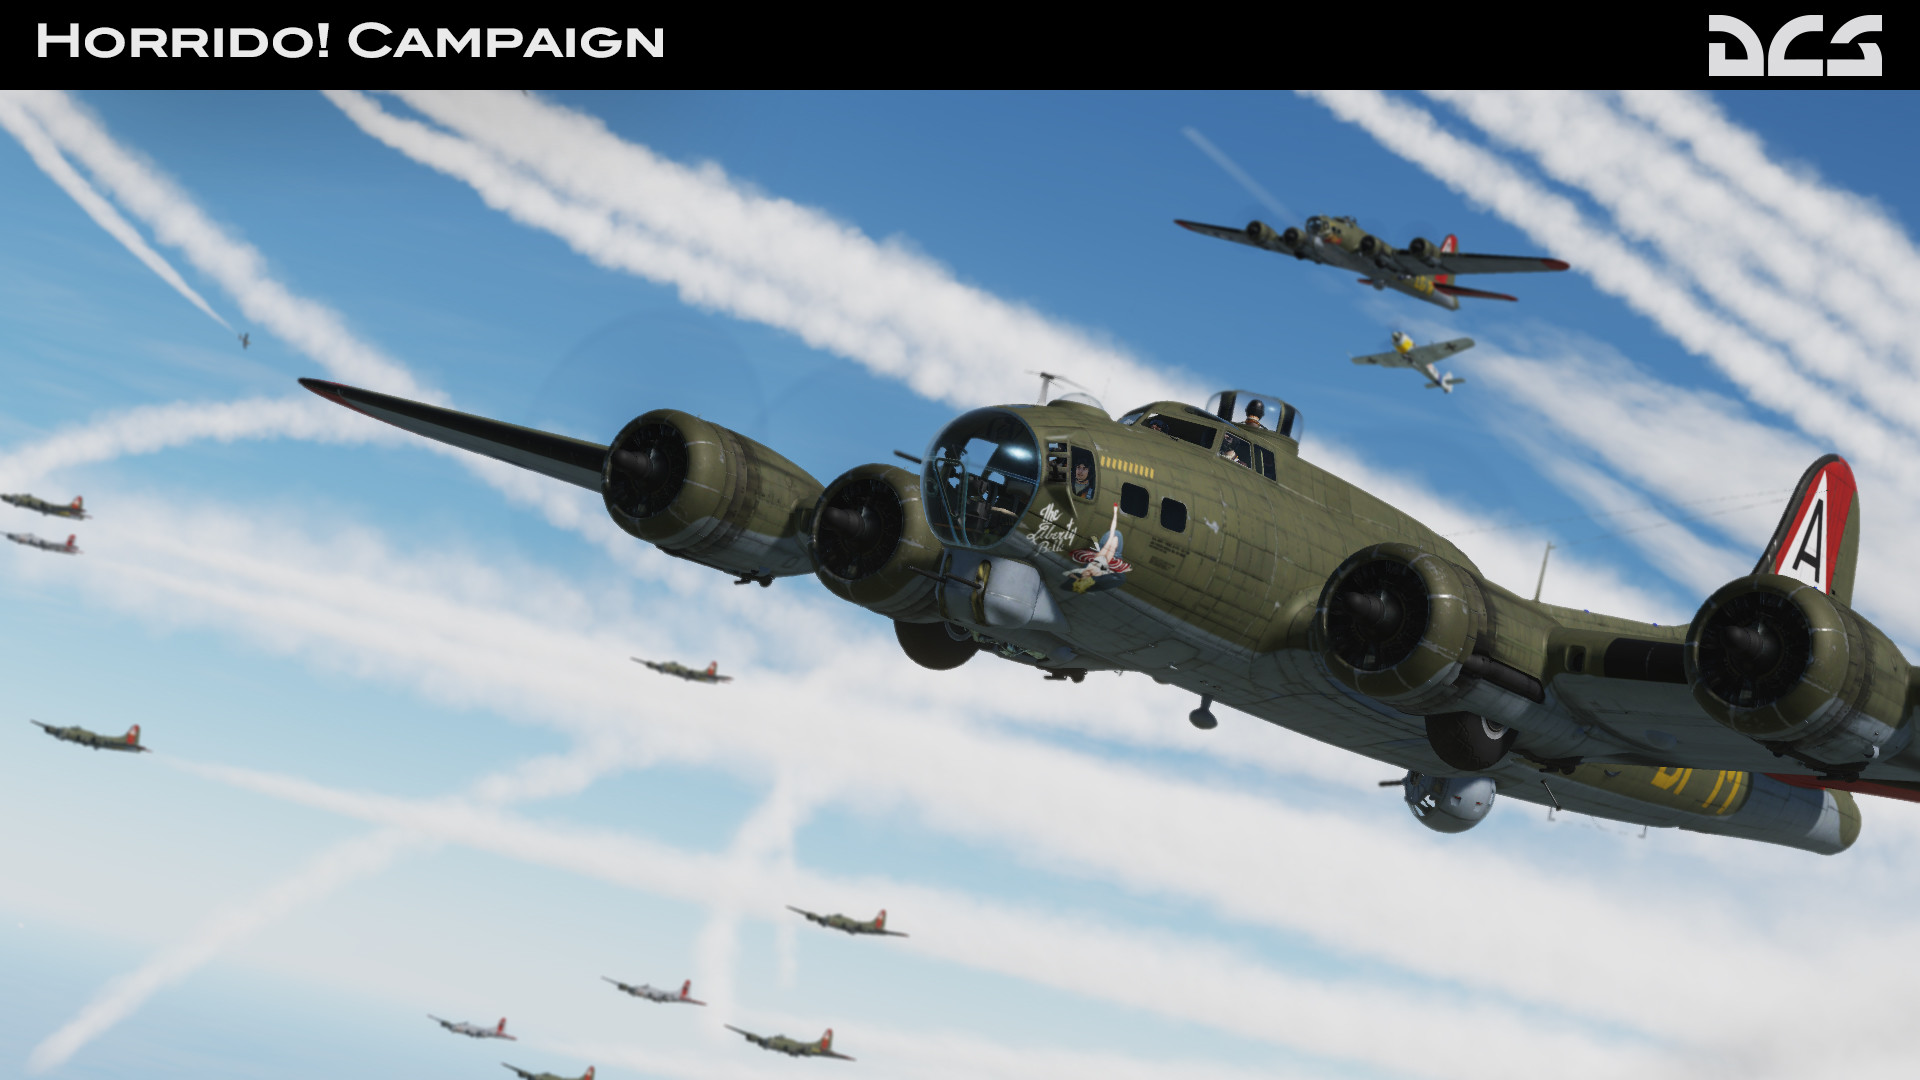 Horrido! Fw Steam DCS: 190 A-8 Campaign on